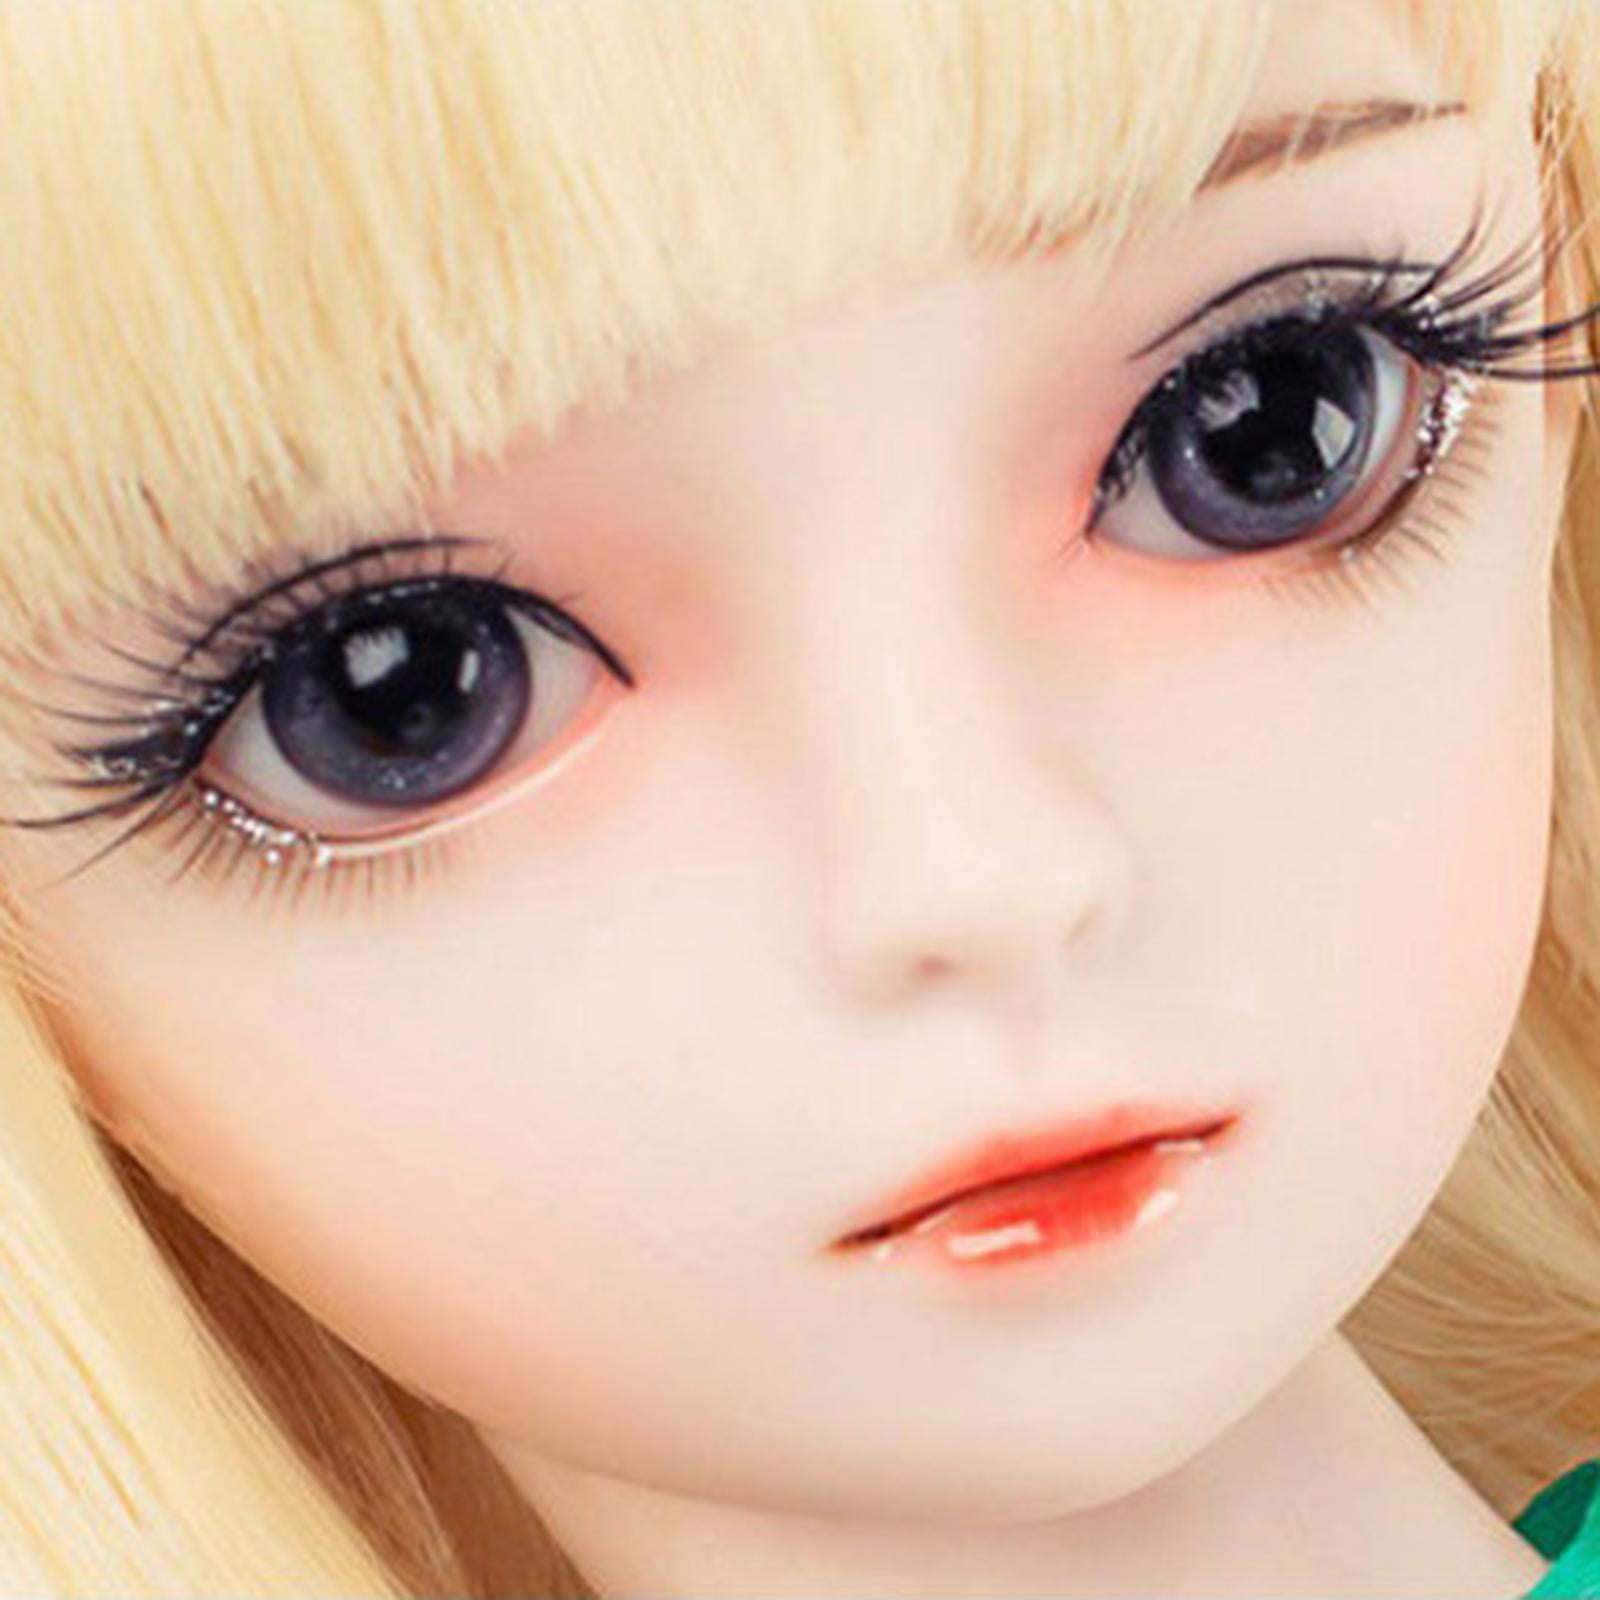 2x Realistic Doll Eyes, Wiggle Eyes (6 Mm) Accessories, Movable